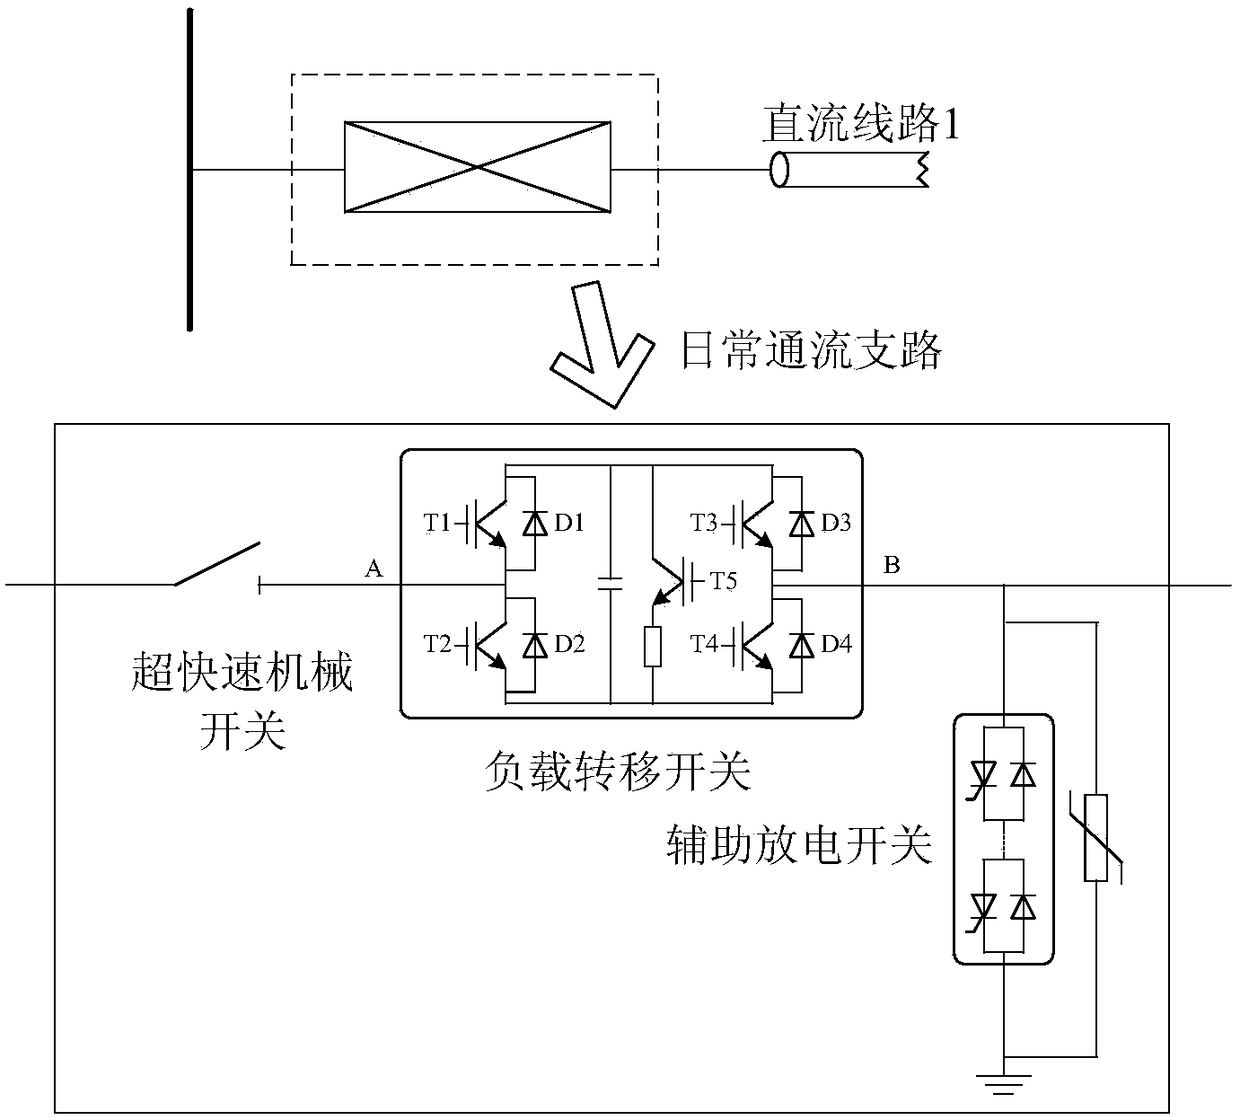 A combined high-voltage DC circuit breaker with DC power flow control capability and its control strategy